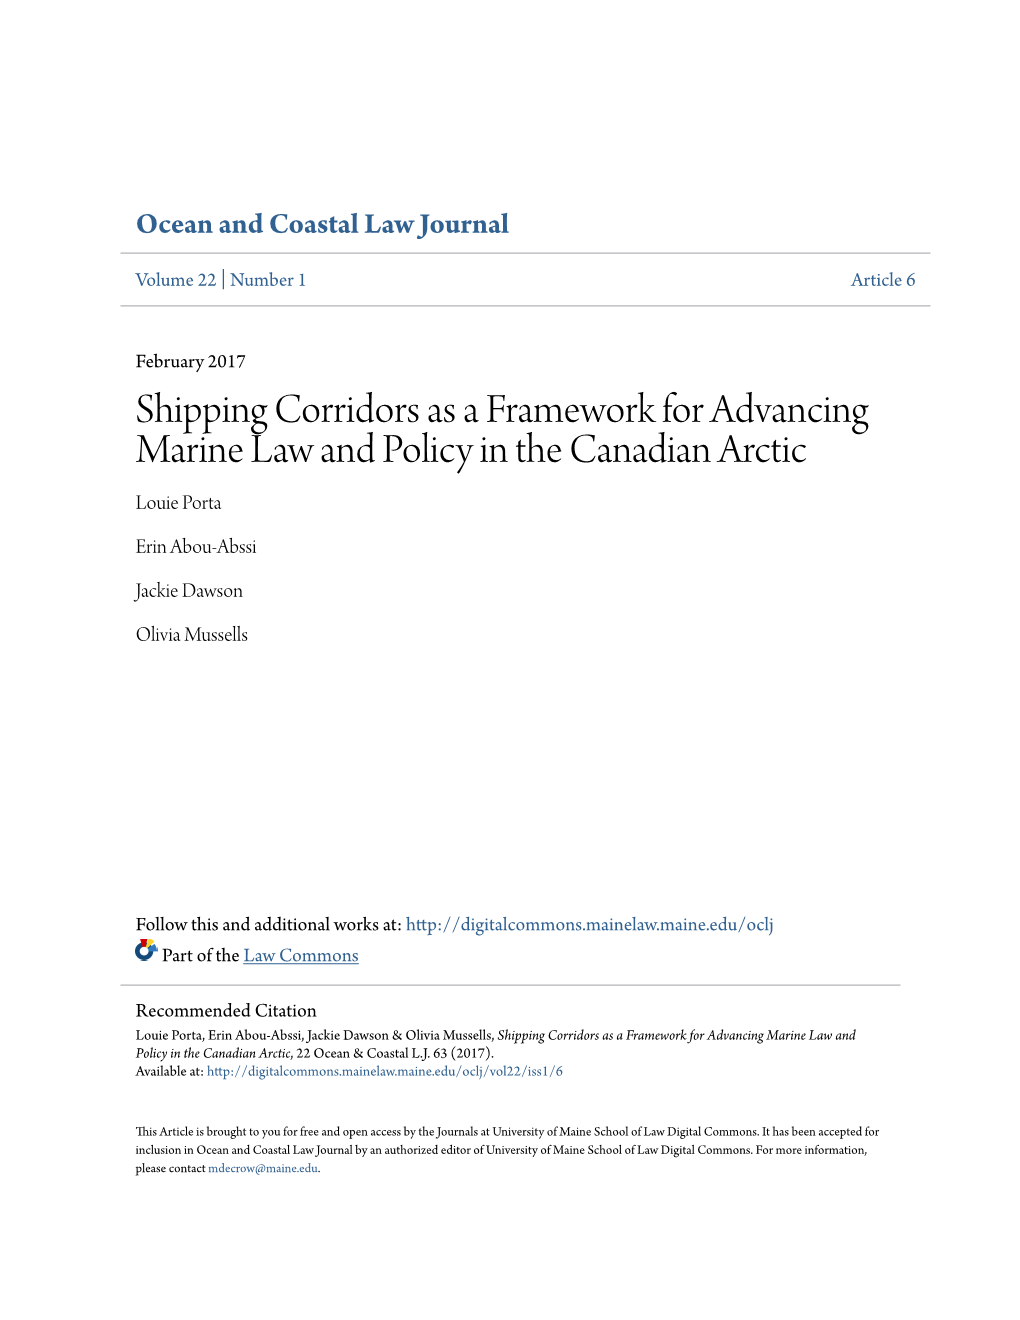 Shipping Corridors As a Framework for Advancing Marine Law and Policy in the Canadian Arctic Louie Porta